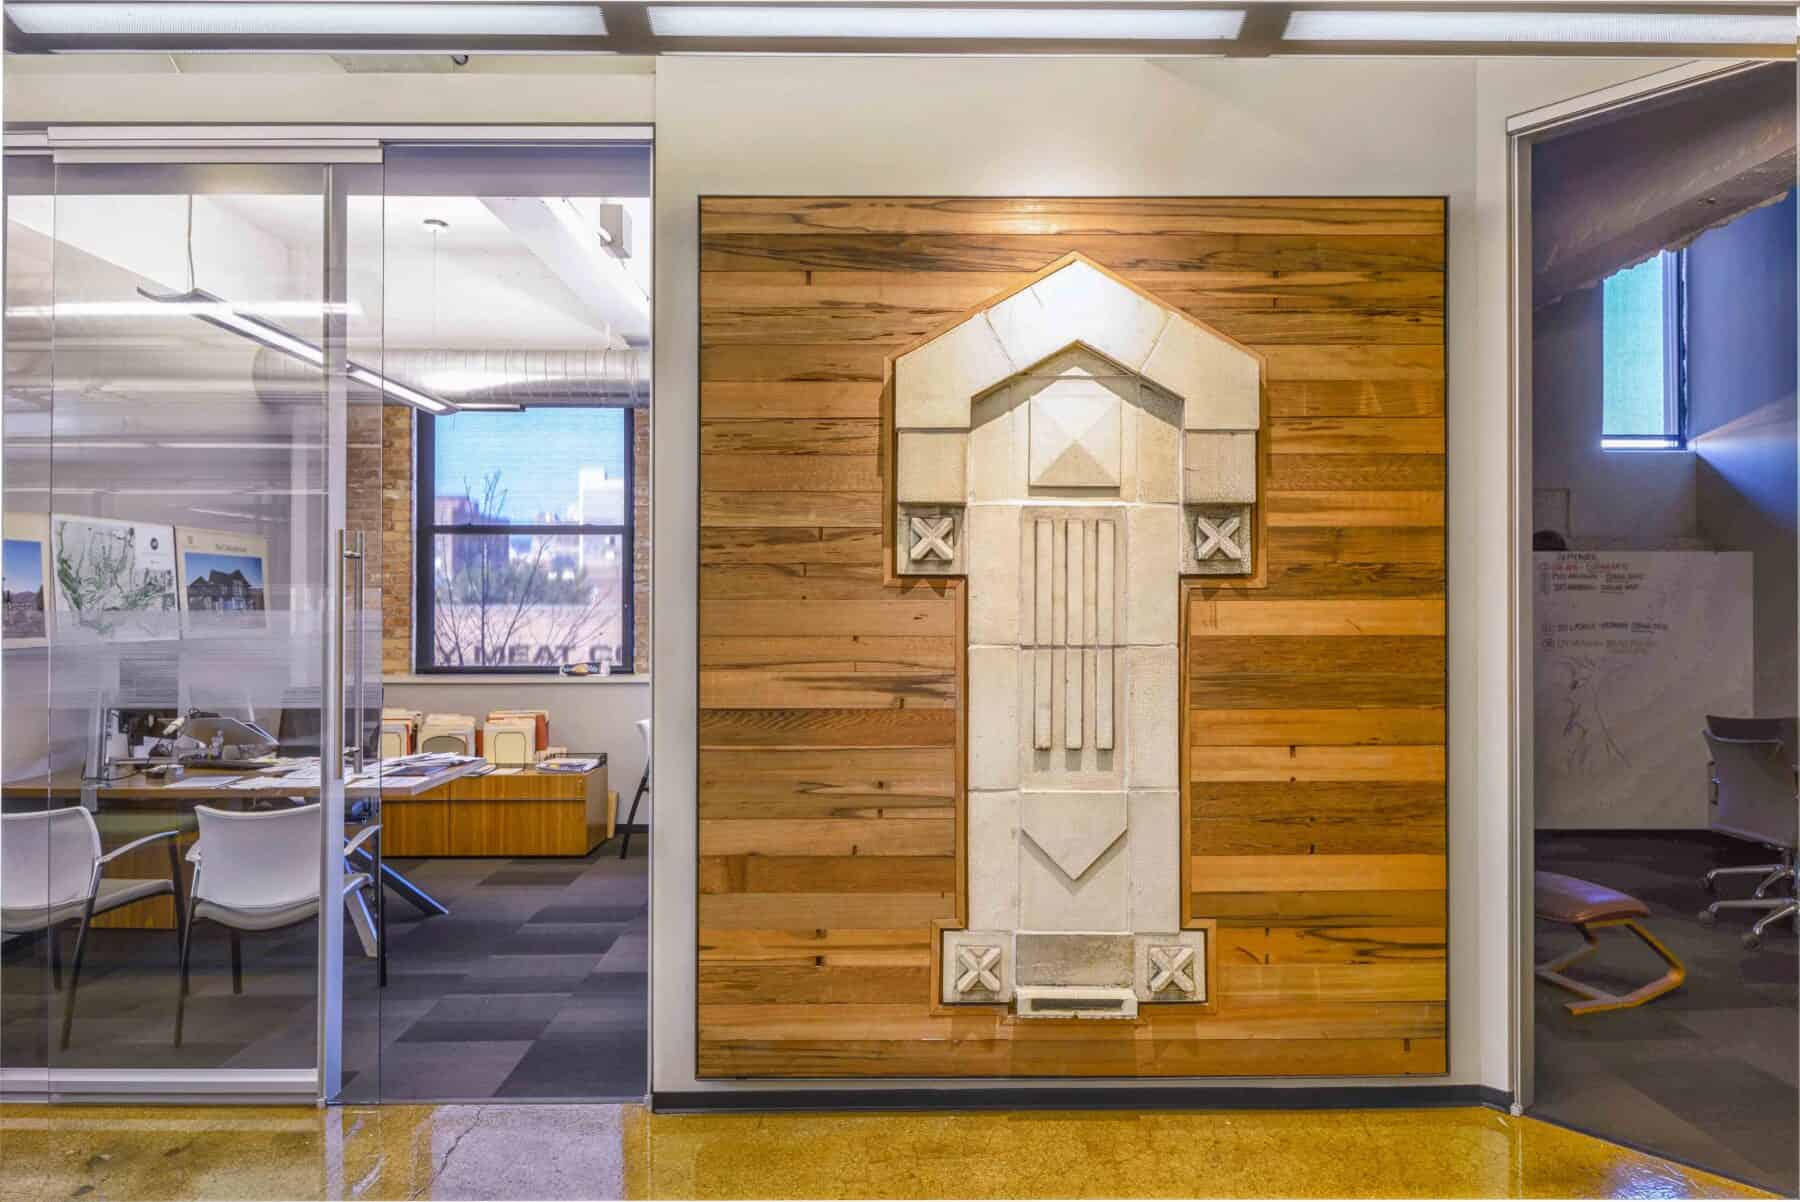 Office Remodel with a Featured Wall of Original Reclaimed Wood and Stone Artifact found in the Building by Commercial Builder & General Contractor Structural Enterprises